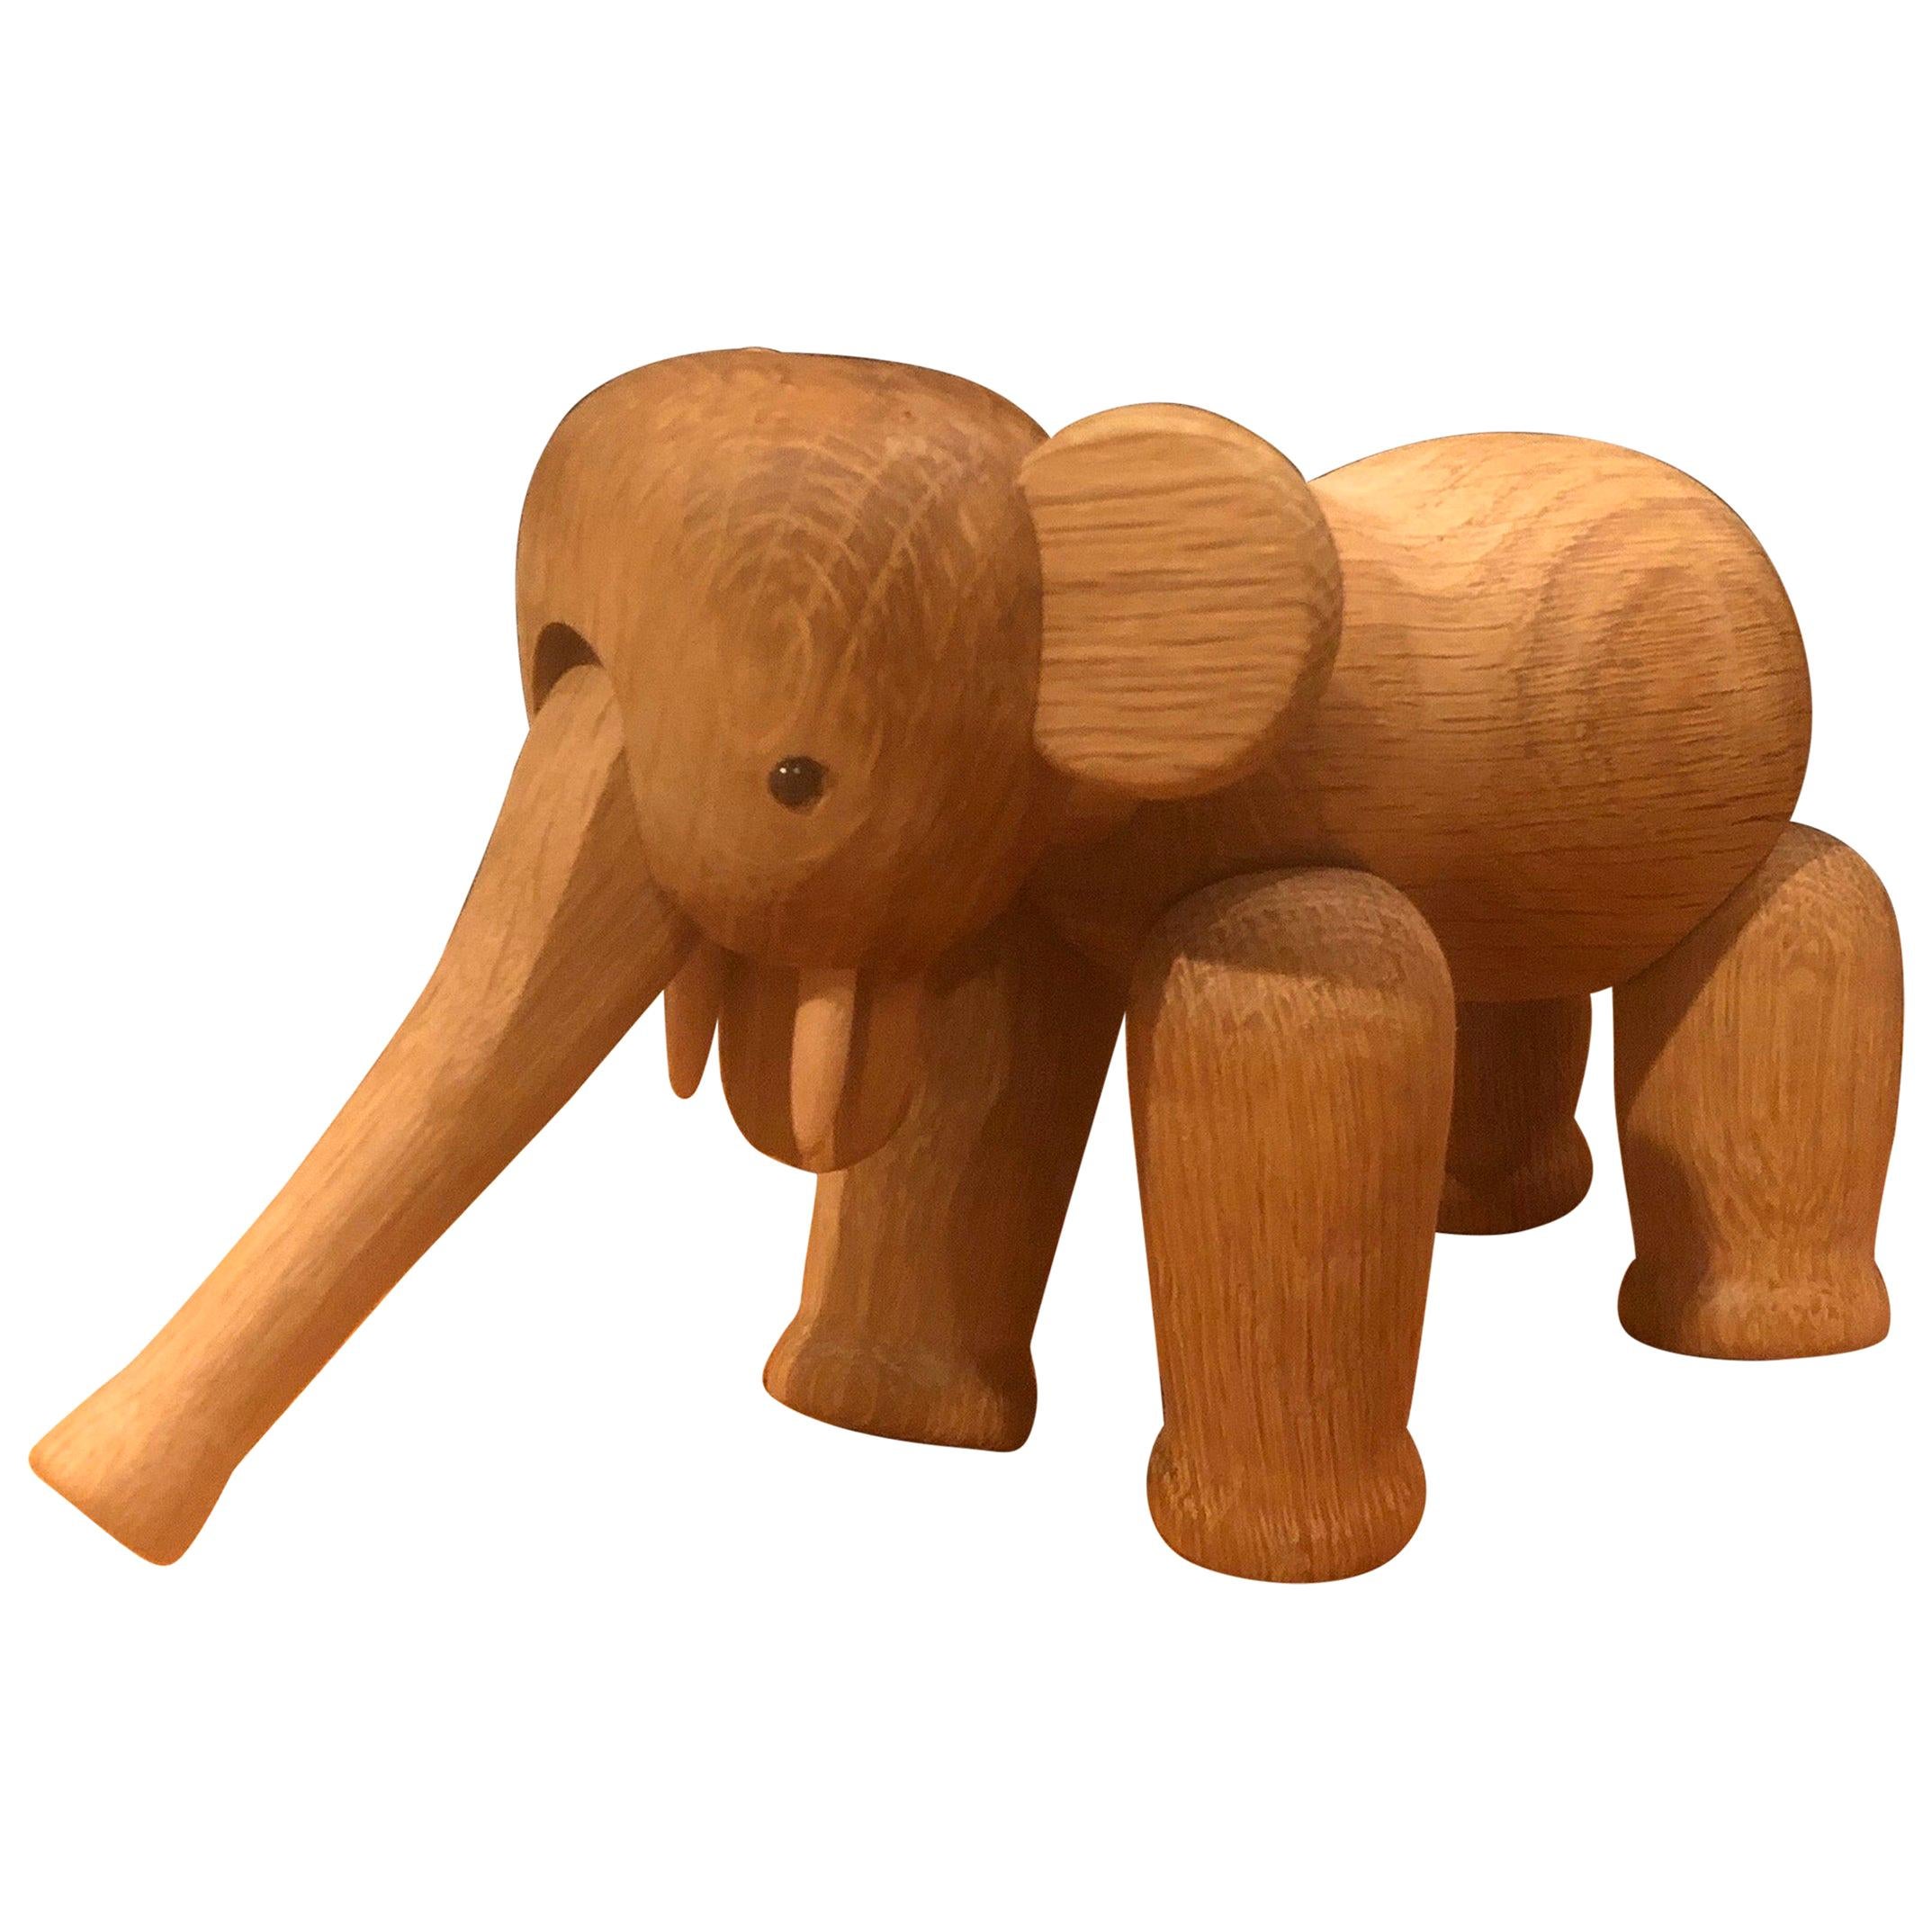 Articulated Toy Elephant by Kay Bojesen For Sale